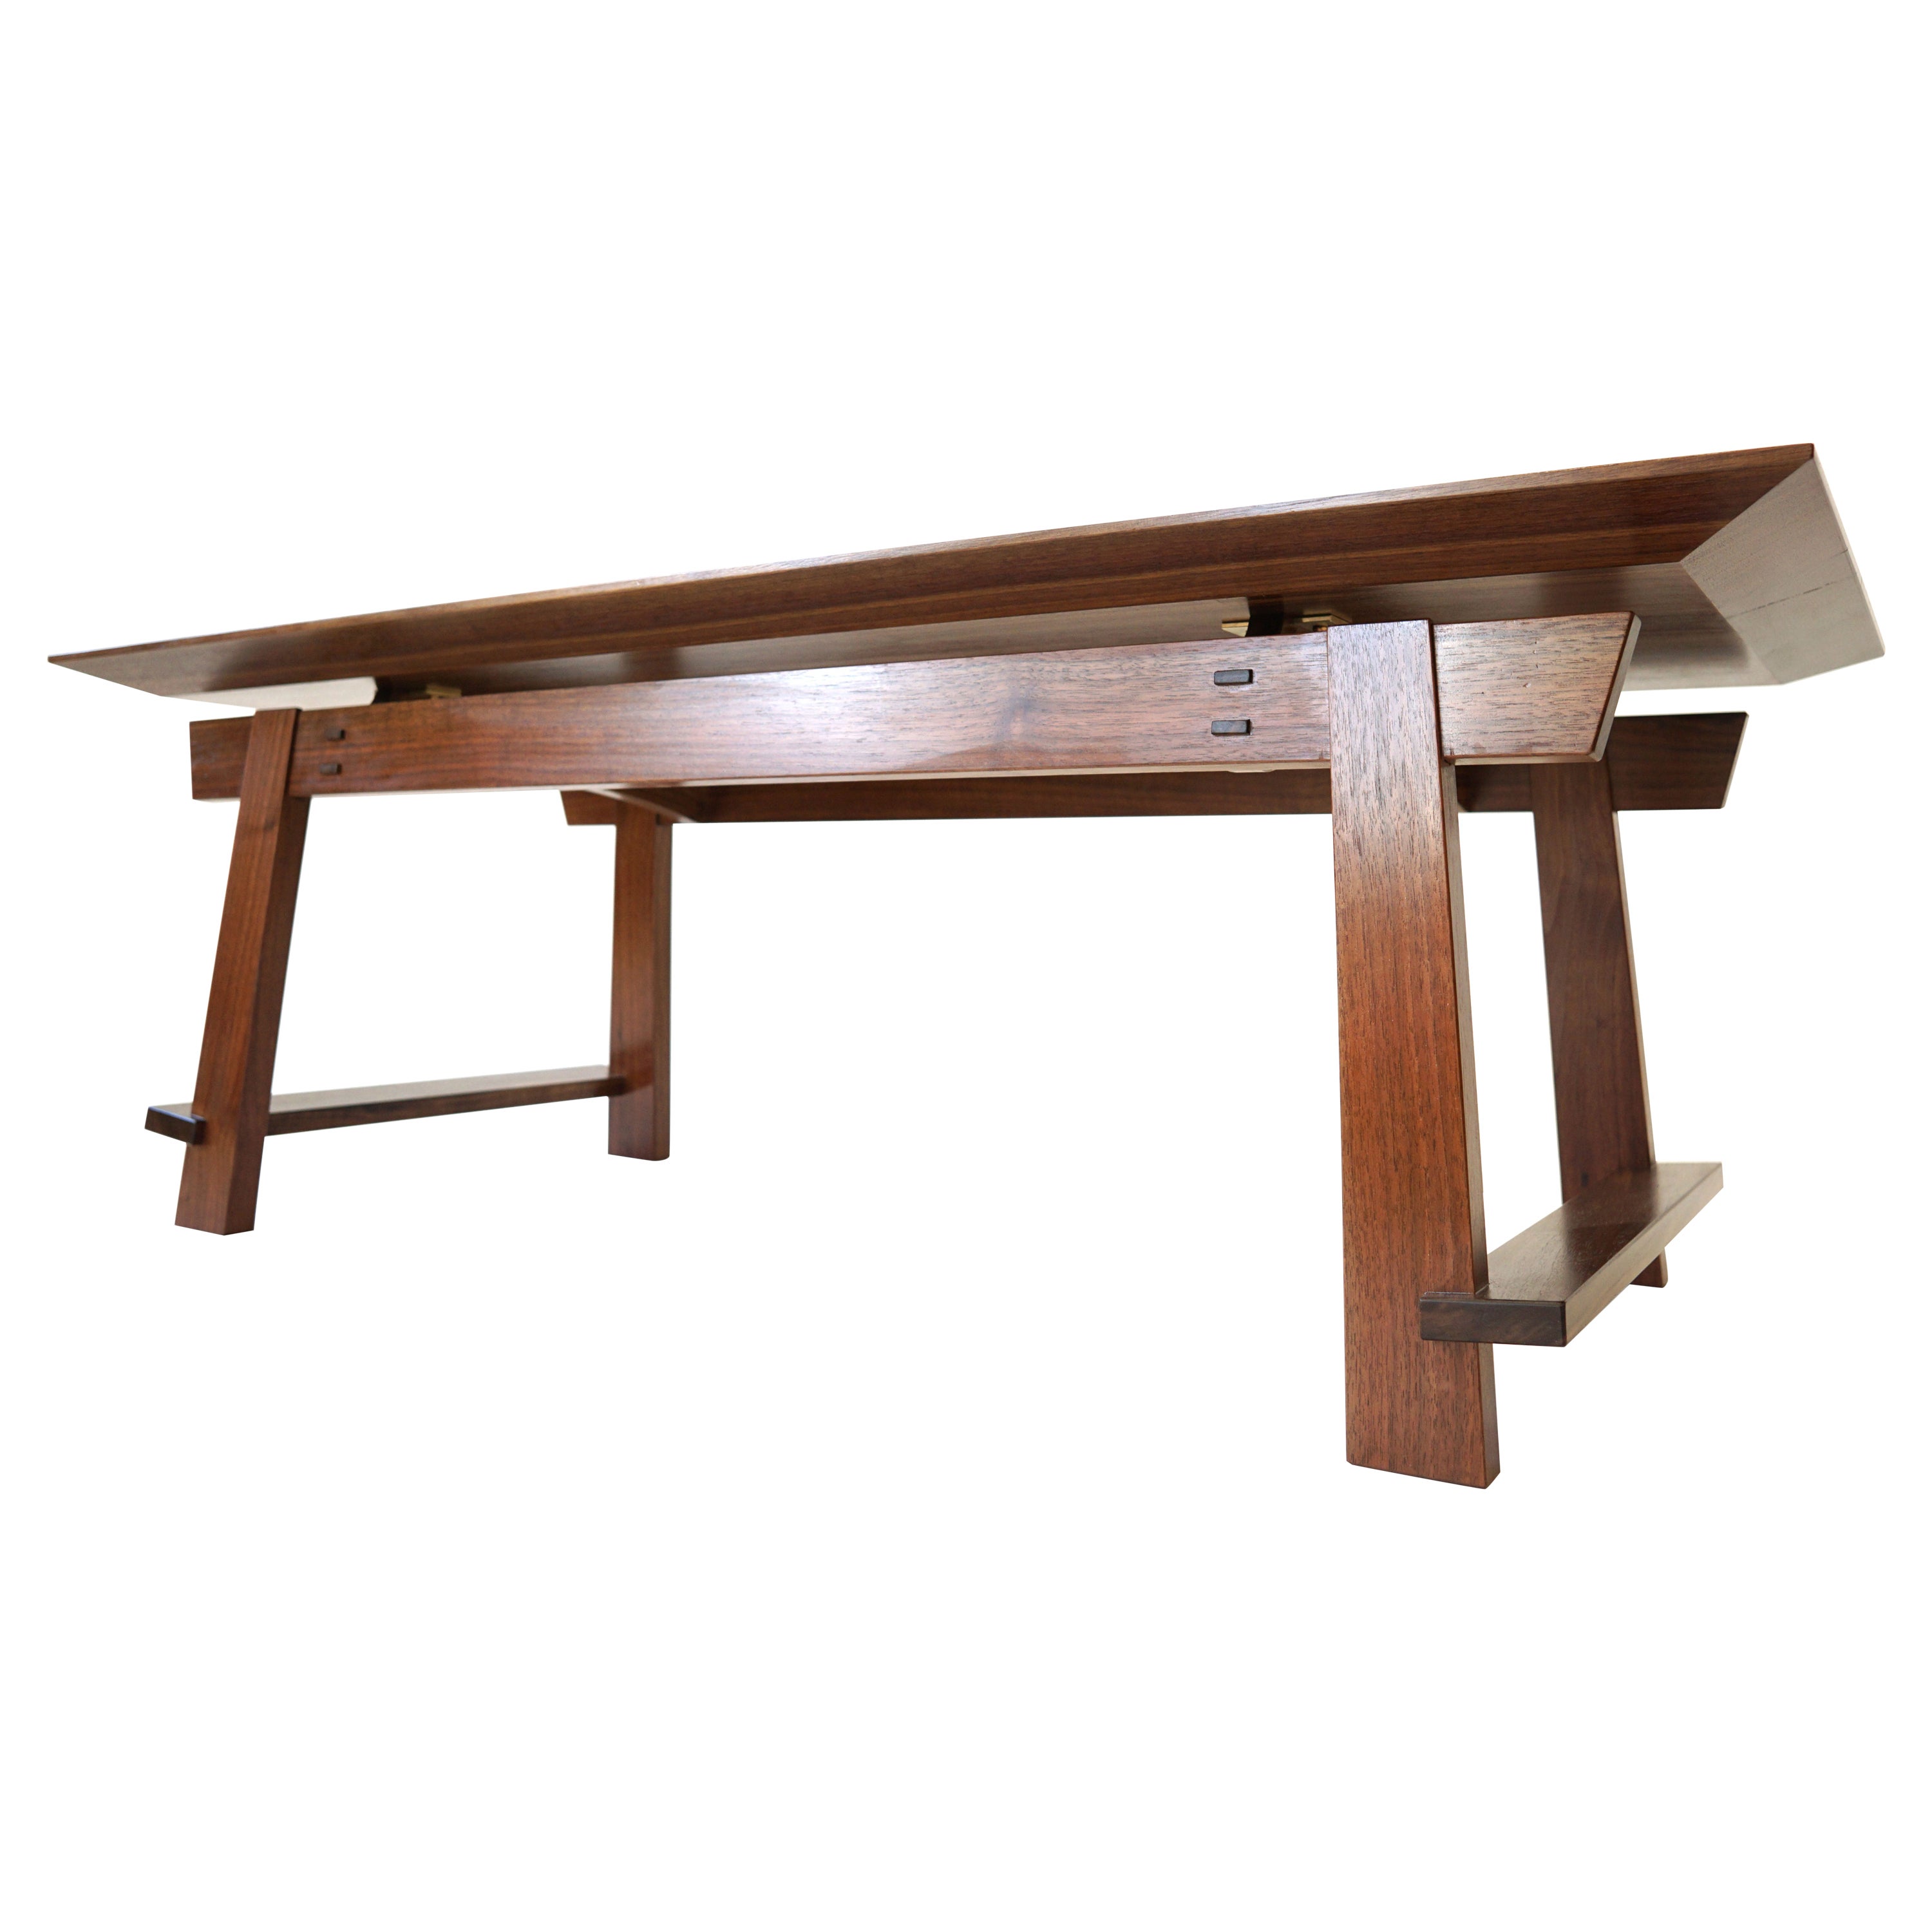 Rilley Coffee Table, Exposed Joinery, Handcrafted in Walnut